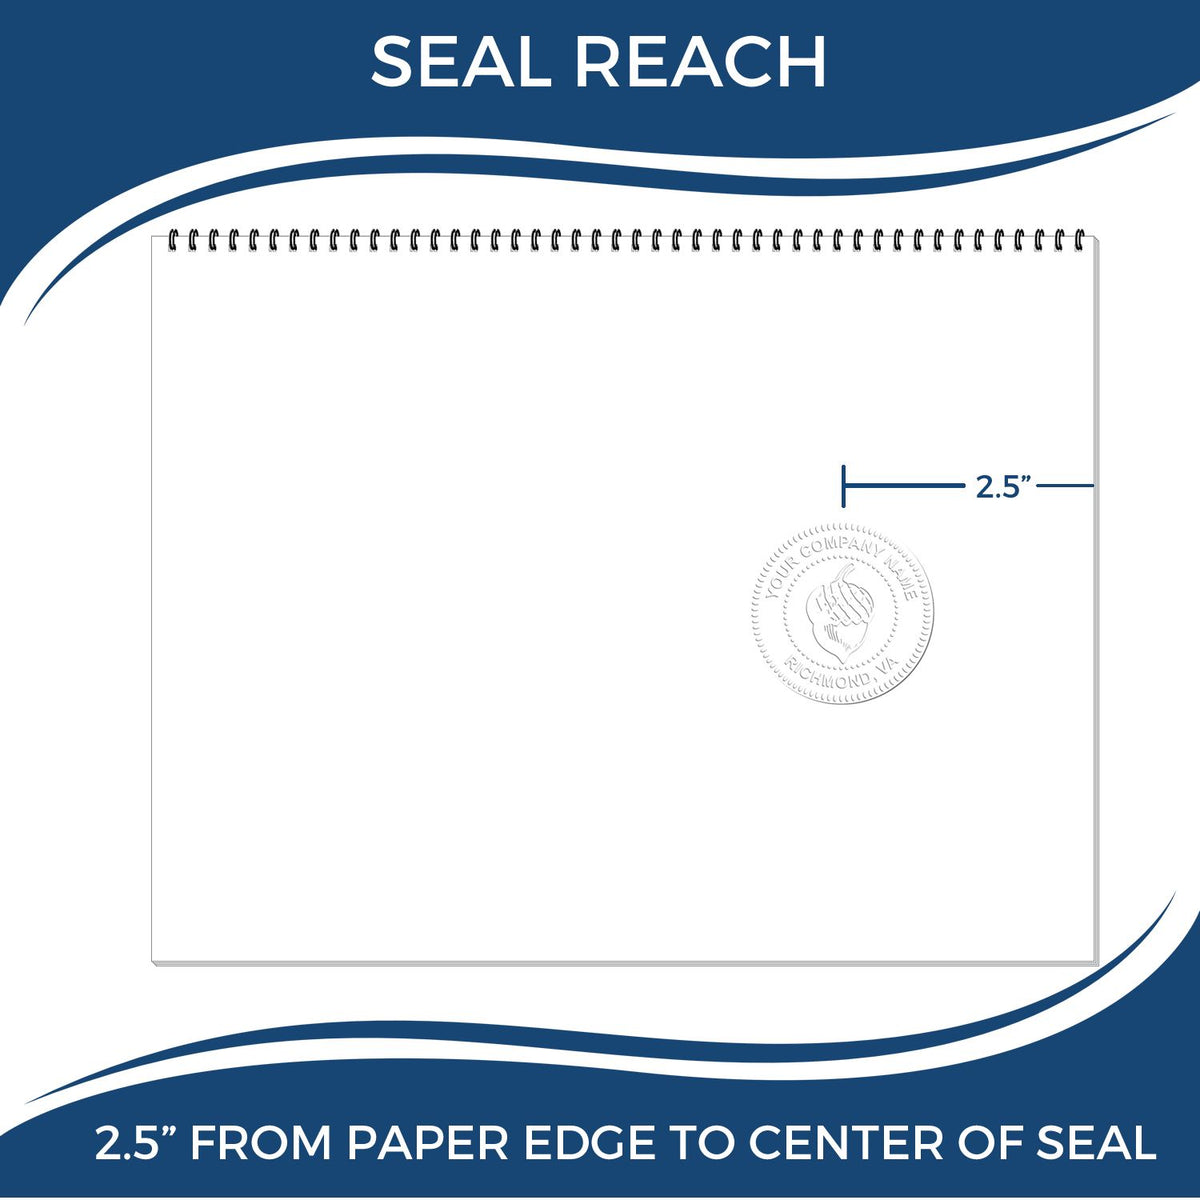 An infographic showing the seal reach which is represented by a ruler and a miniature seal image of the Heavy Duty Cast Iron Florida Land Surveyor Seal Embosser